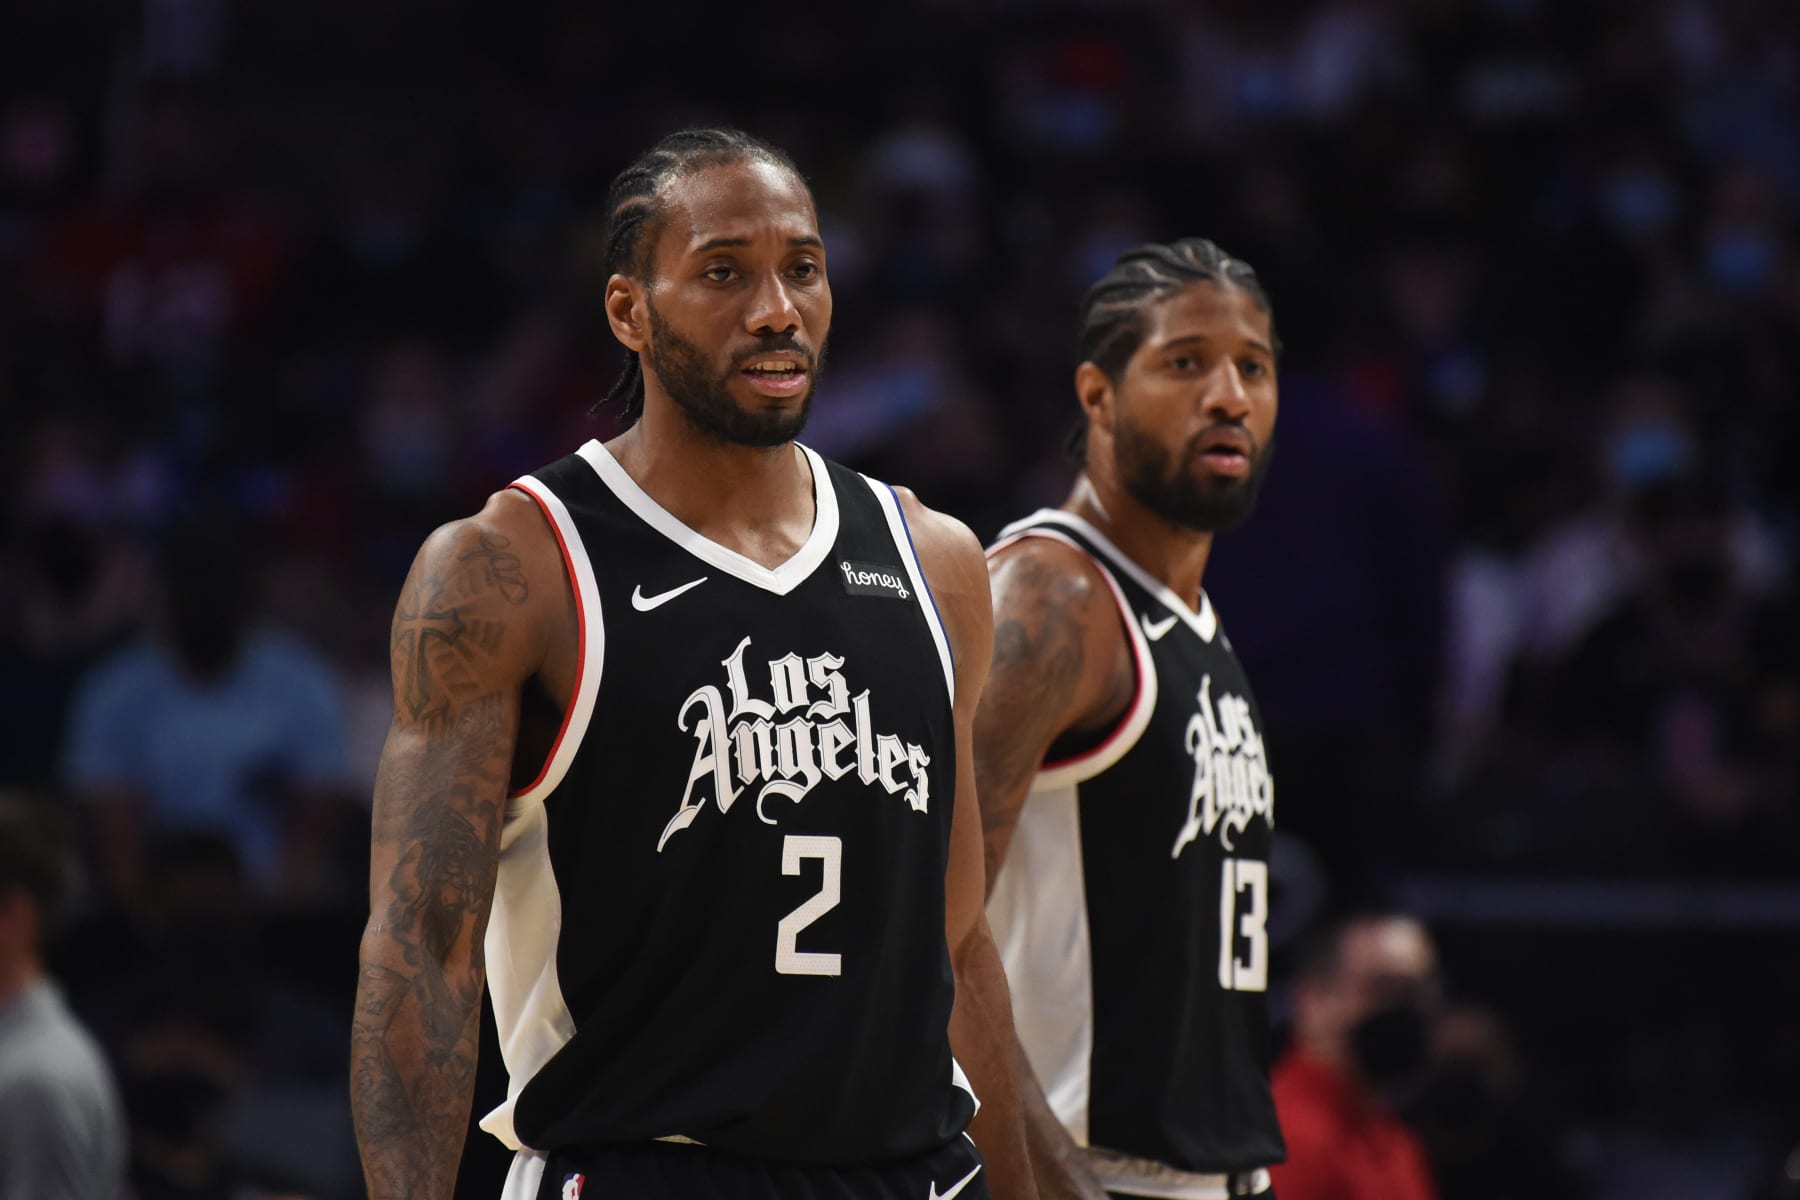 Miami Heat: Are they pretenders or contenders heading into 2020-21?